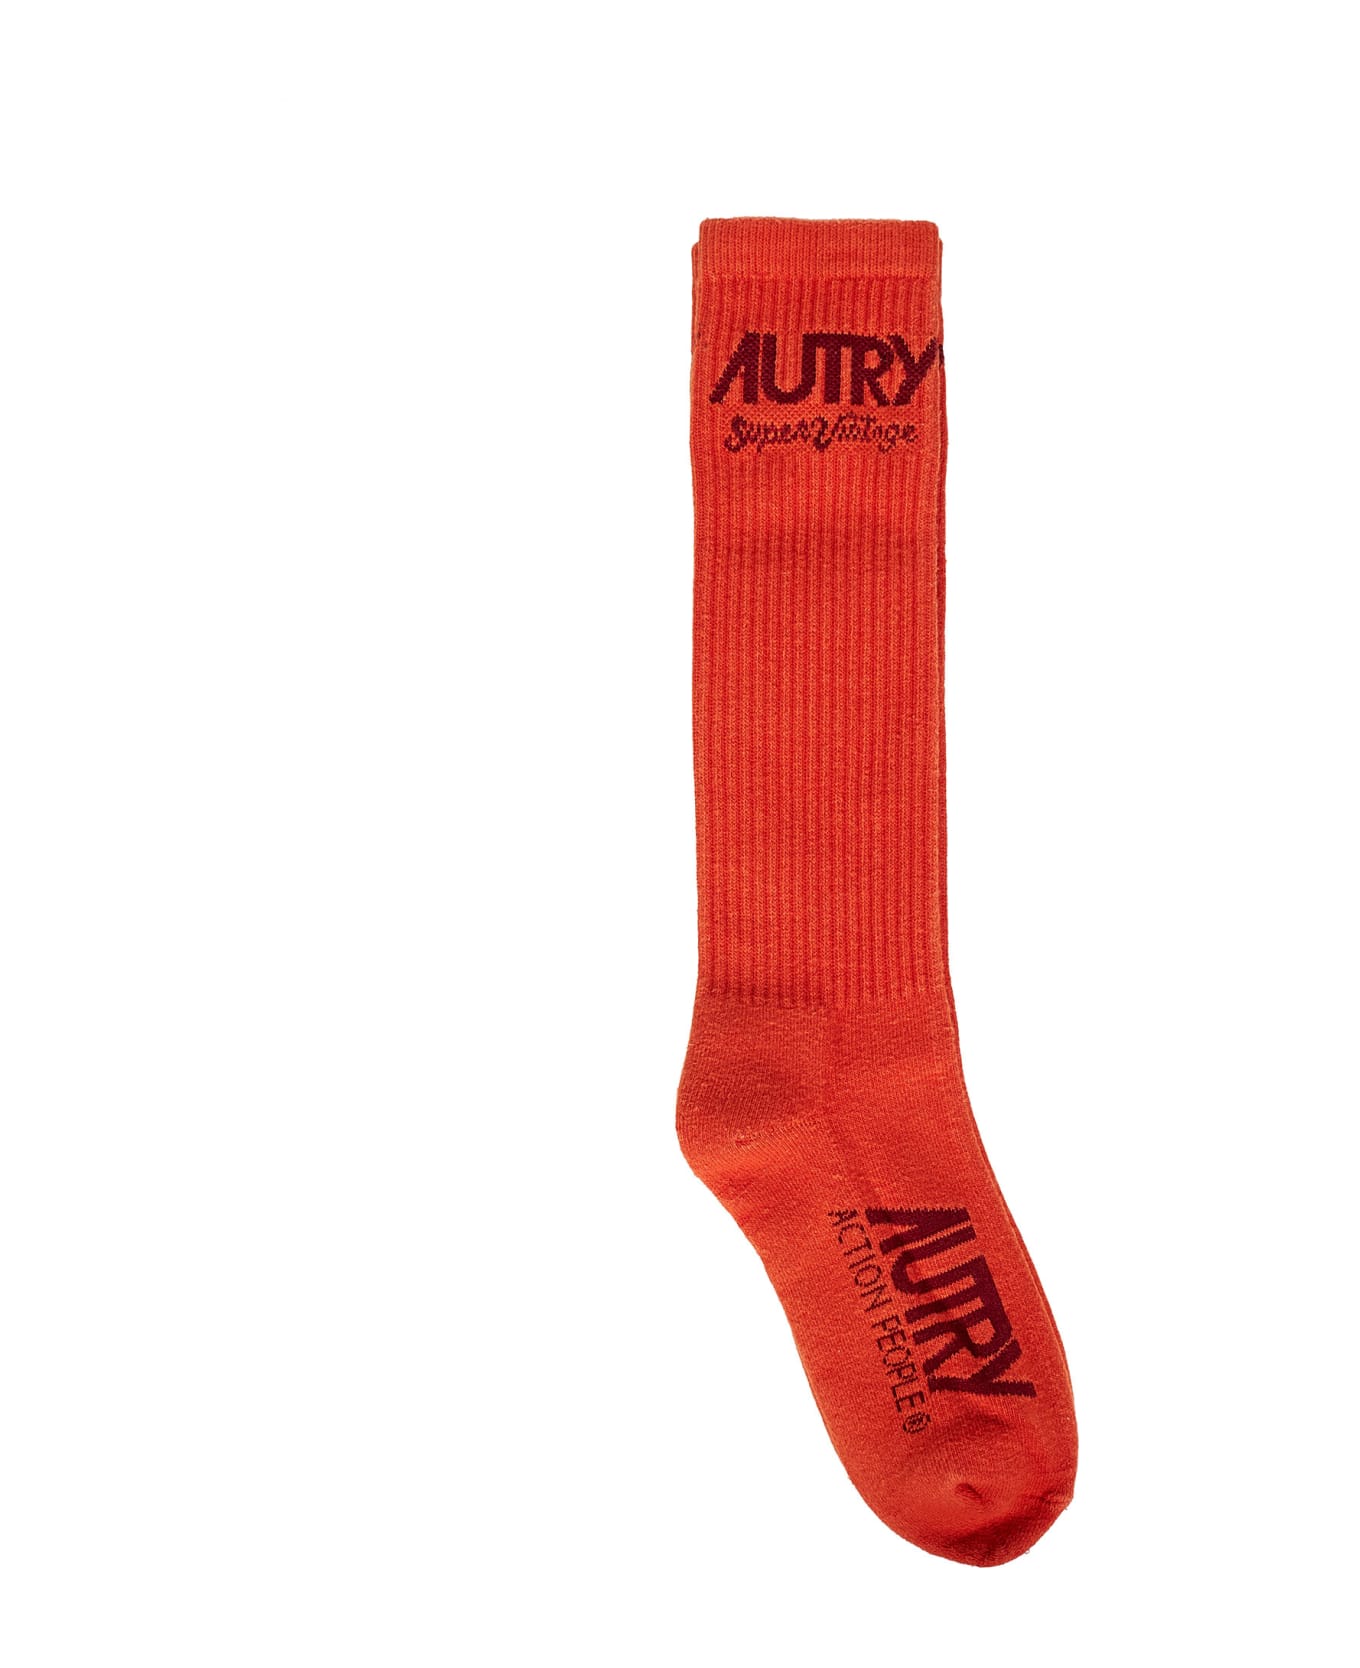 Autry Supervintage Socks - Tinto orng